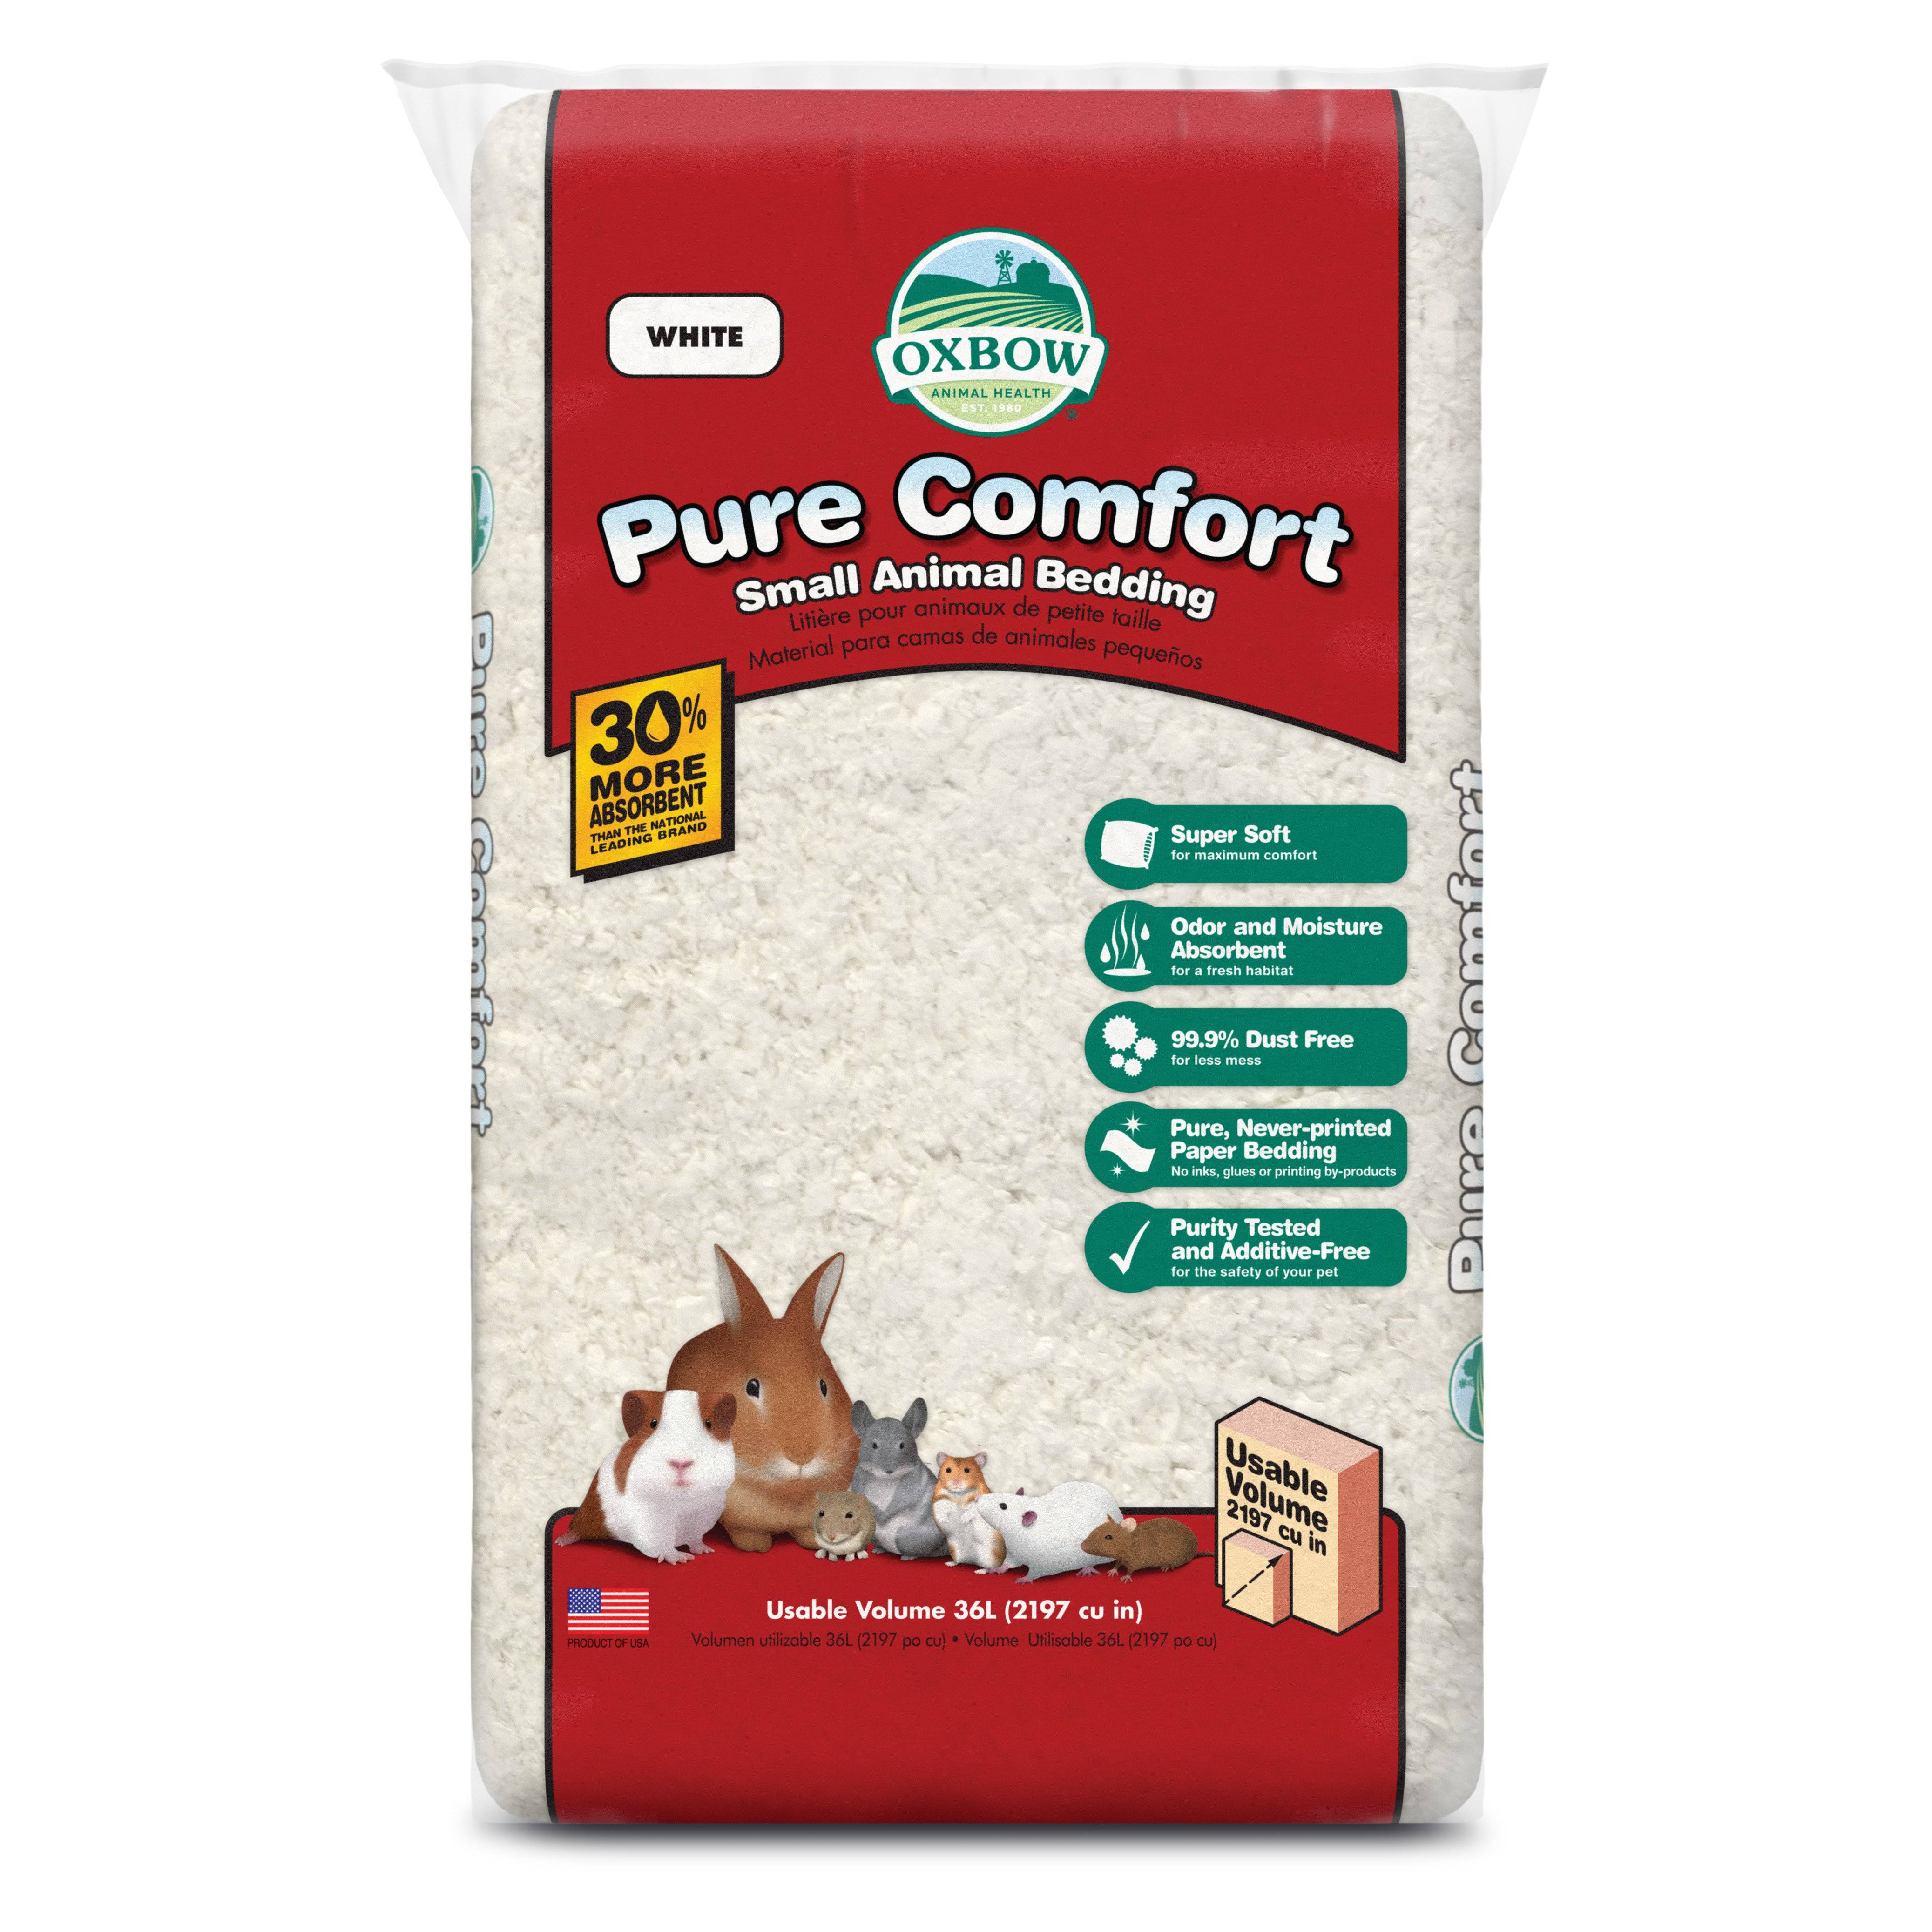 Oxbow Pure Comfort Bedding - White, 21l